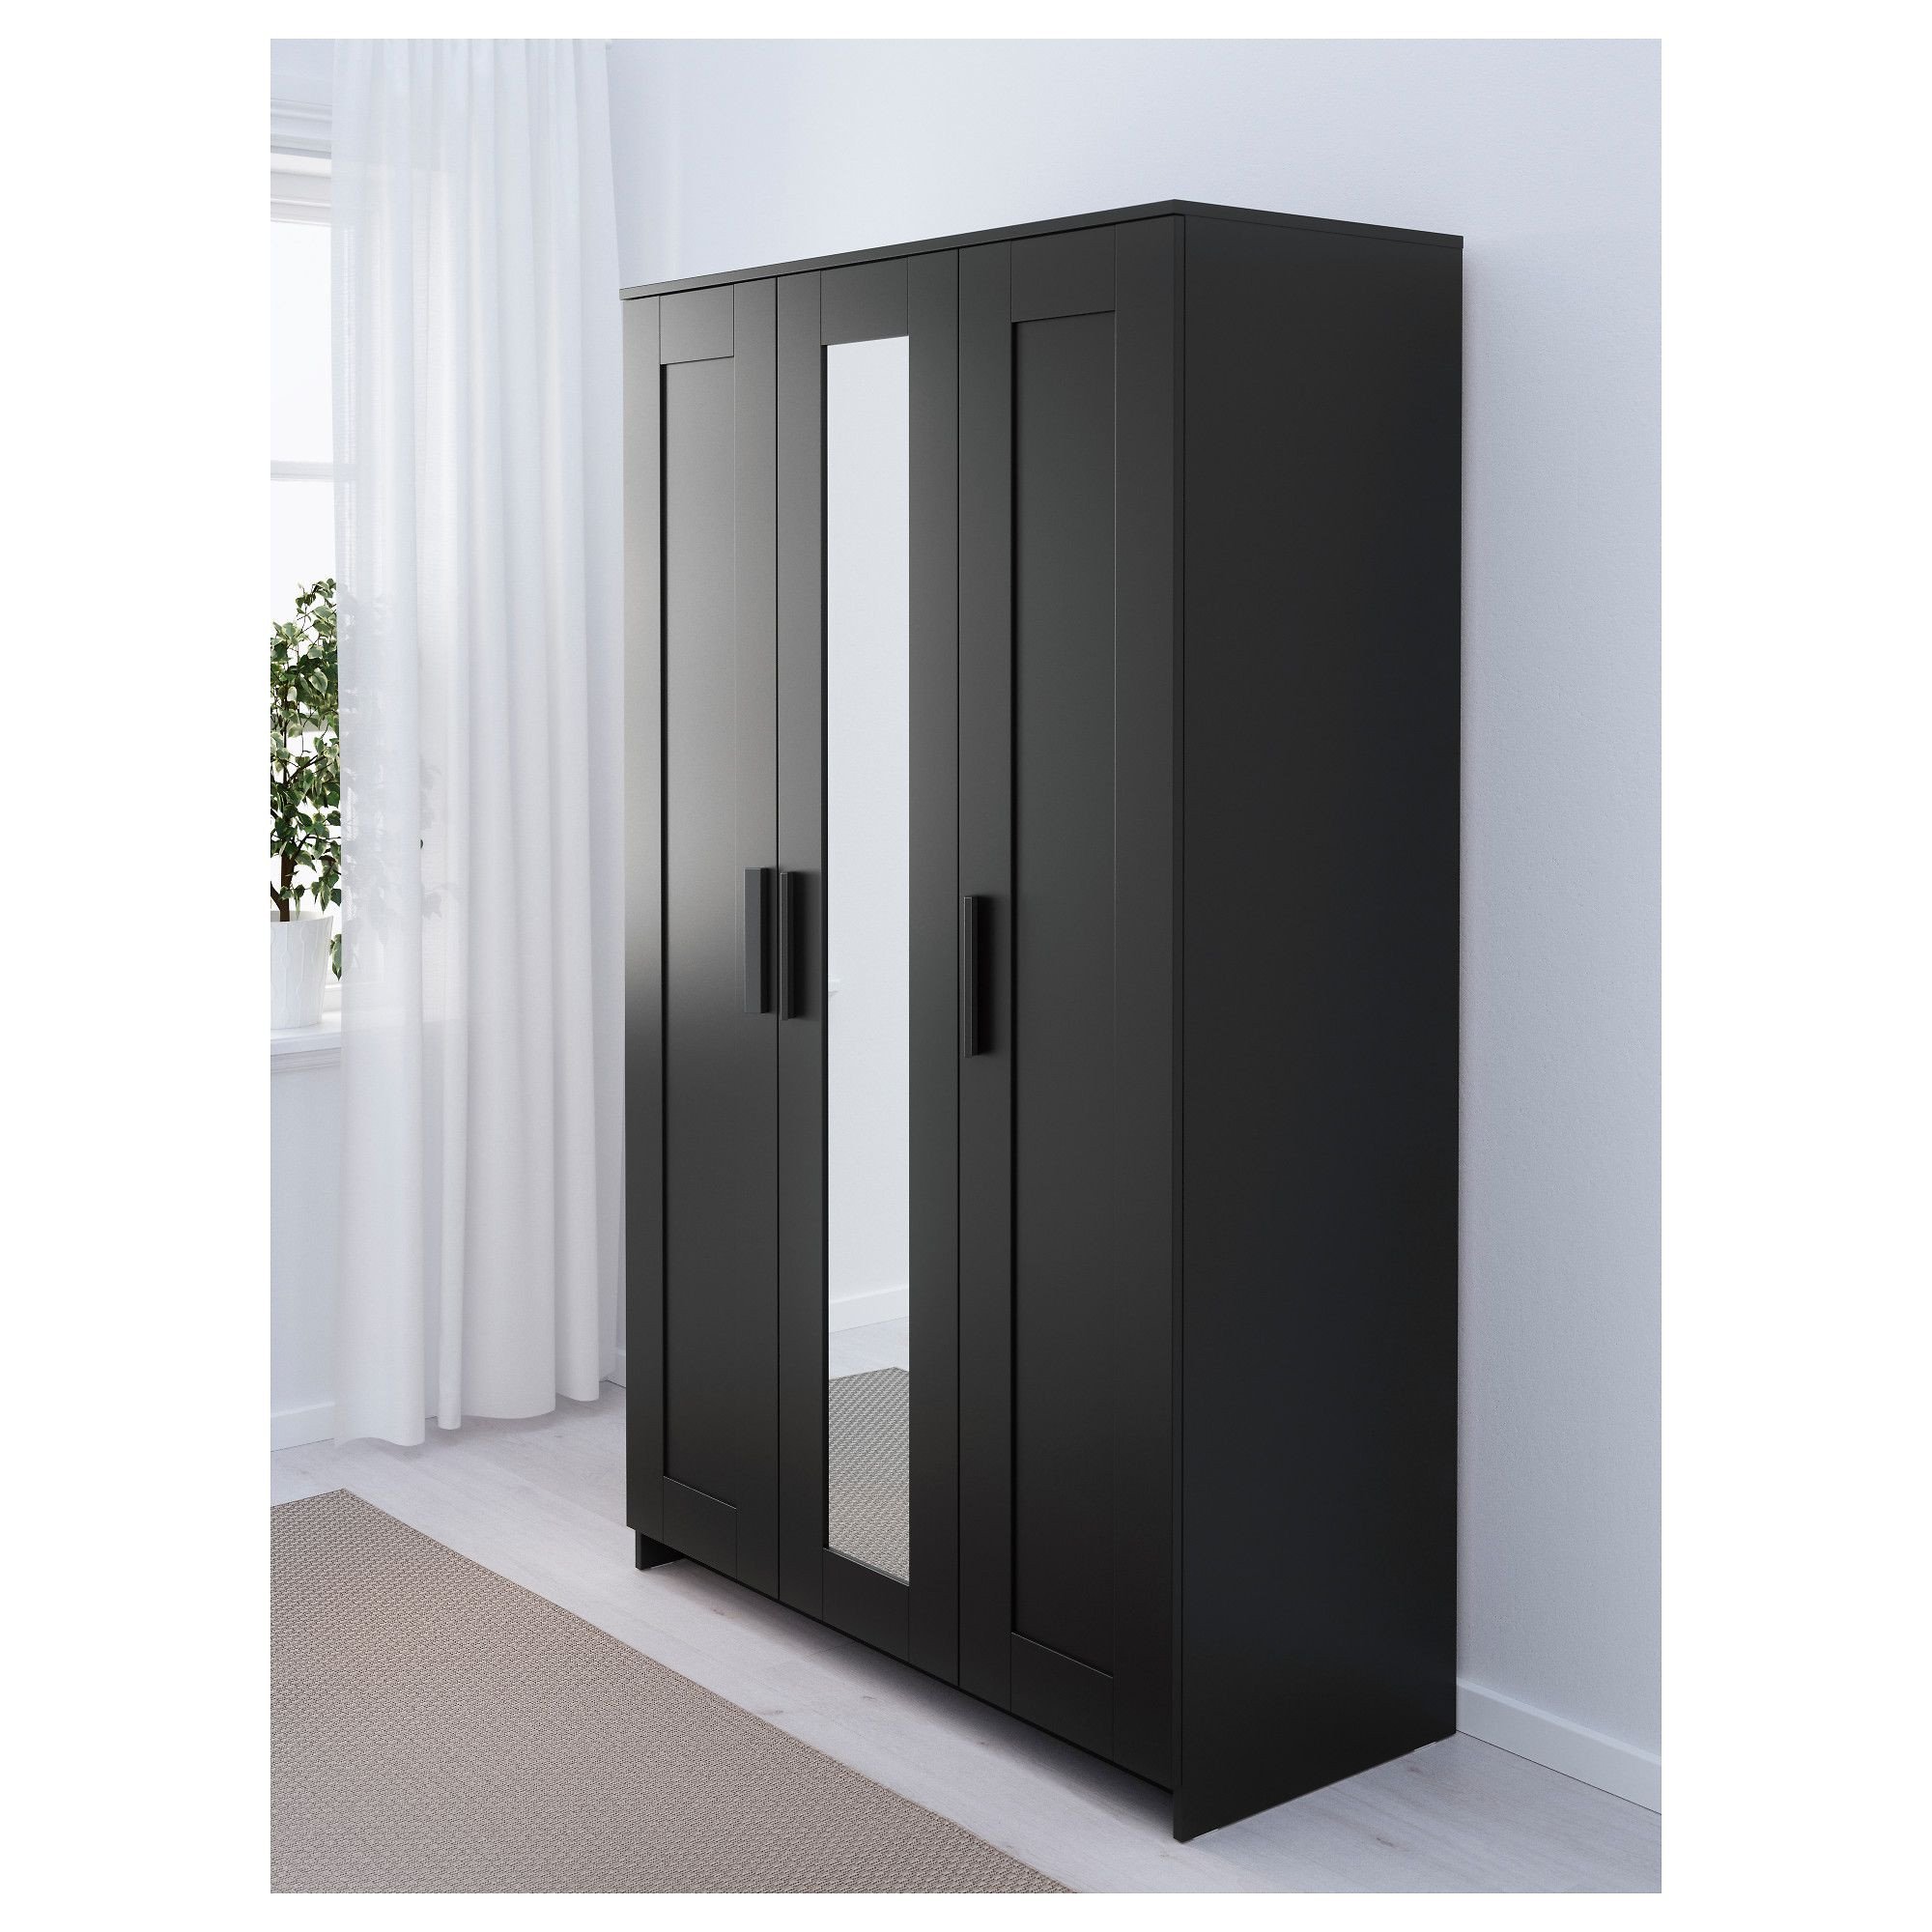 Ikea Bedroom Furniture Wardrobes Luxury Shop for Furniture Home Accessories &amp; More